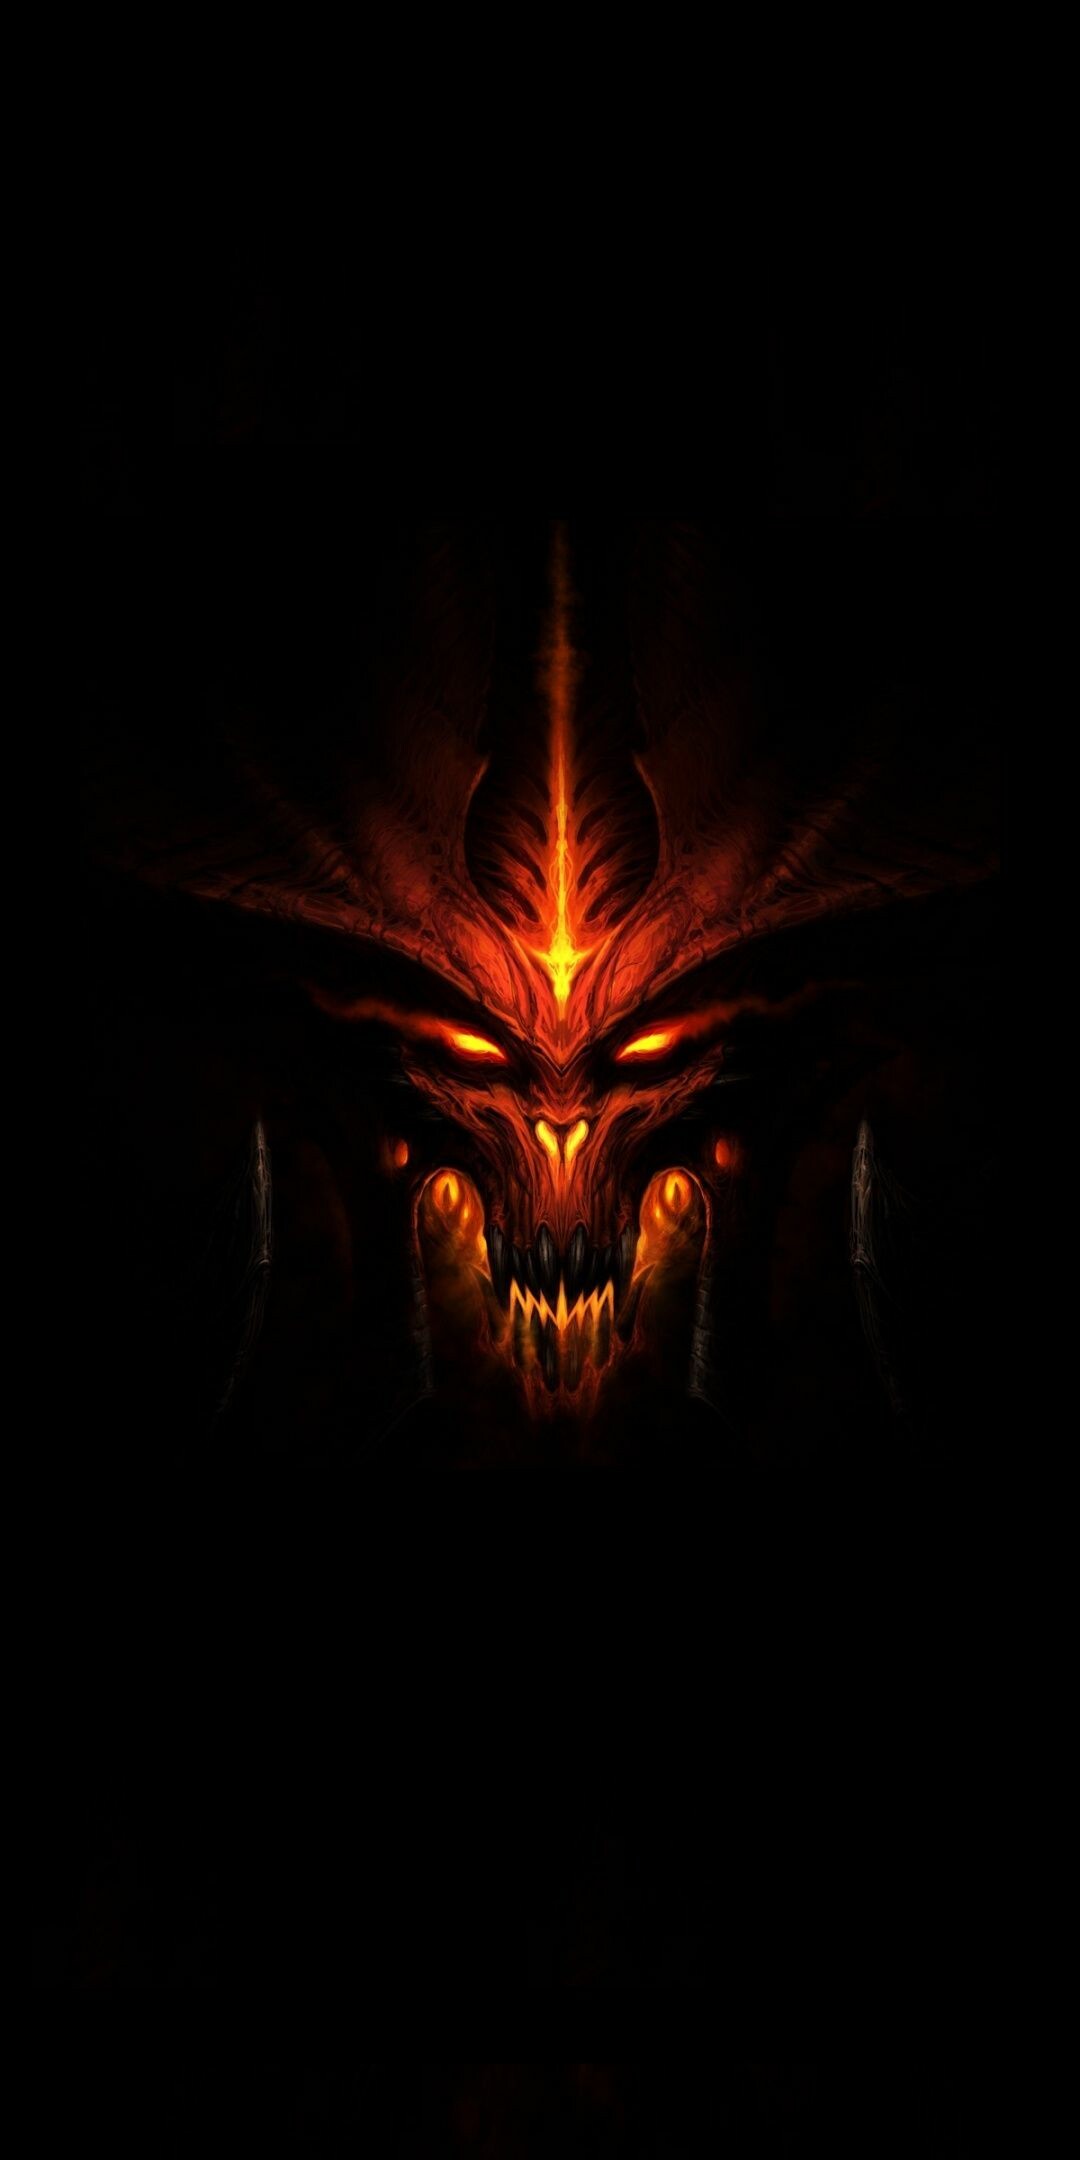 Diablo: The title character of the franchise has been well-received as its overarching antagonist, The action role-playing video game by Blizzard. 1080x2160 HD Wallpaper.